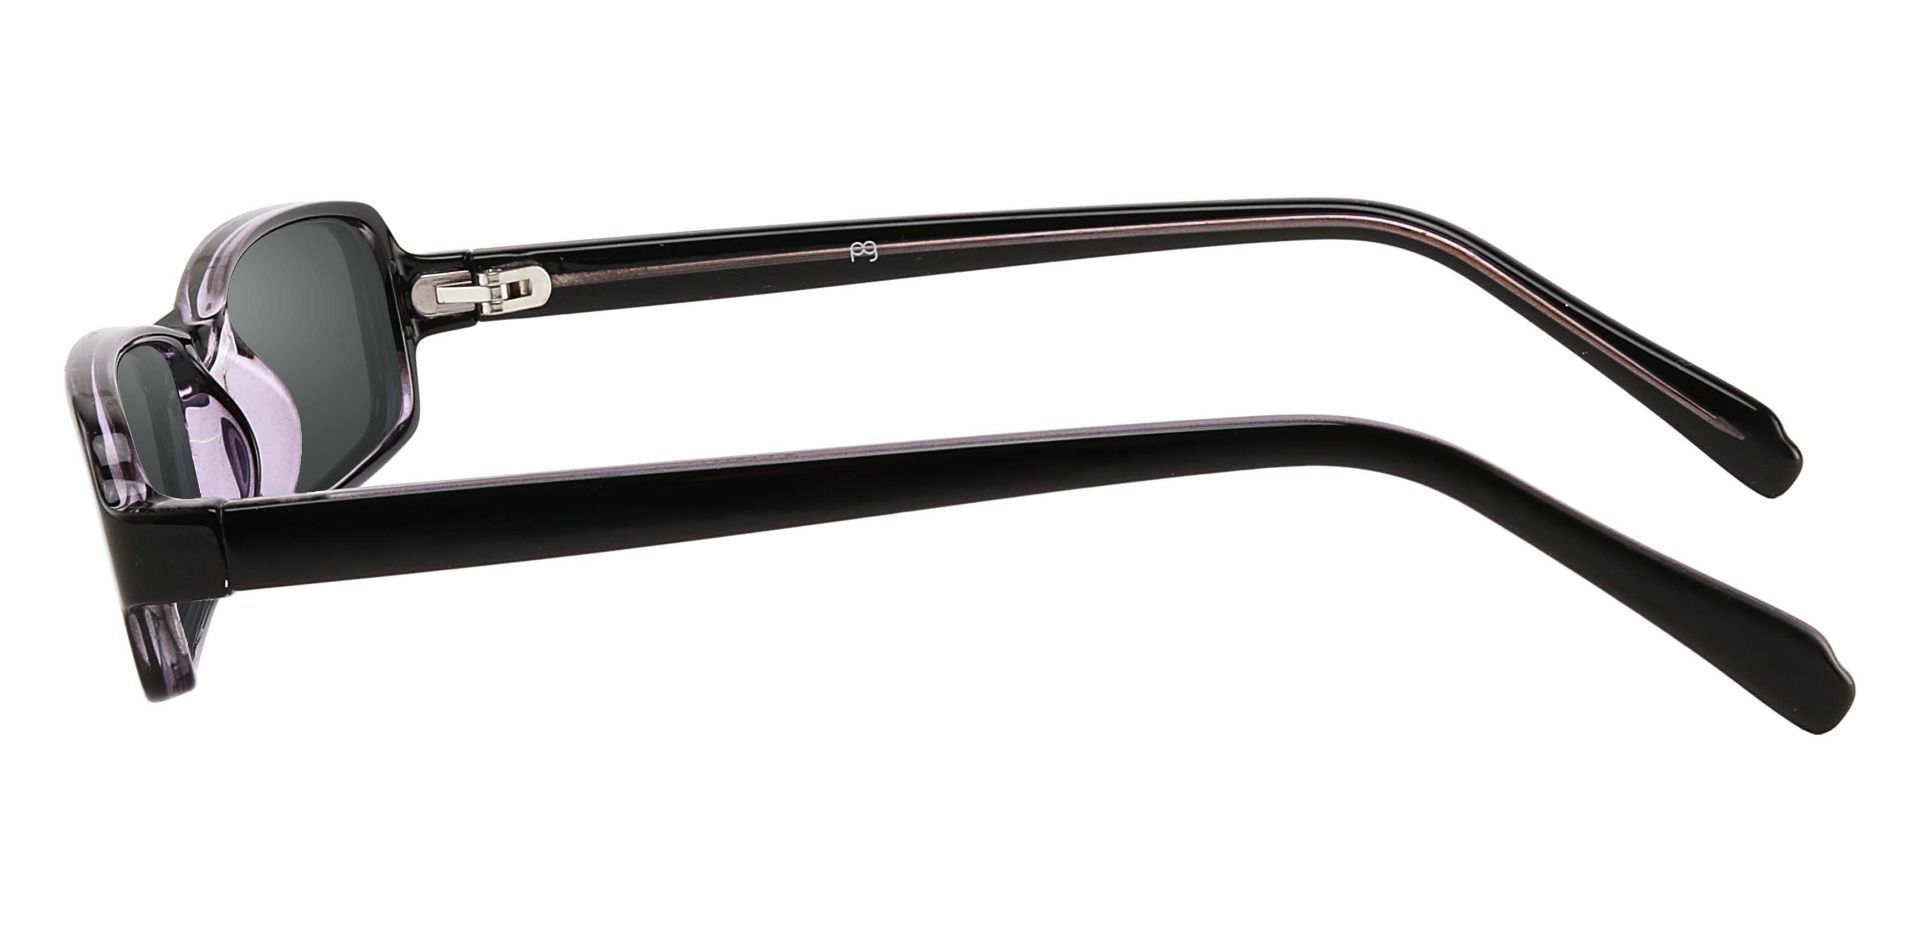 Thyme Rectangle Non-Rx Sunglasses - Black Frame With Gray Lenses